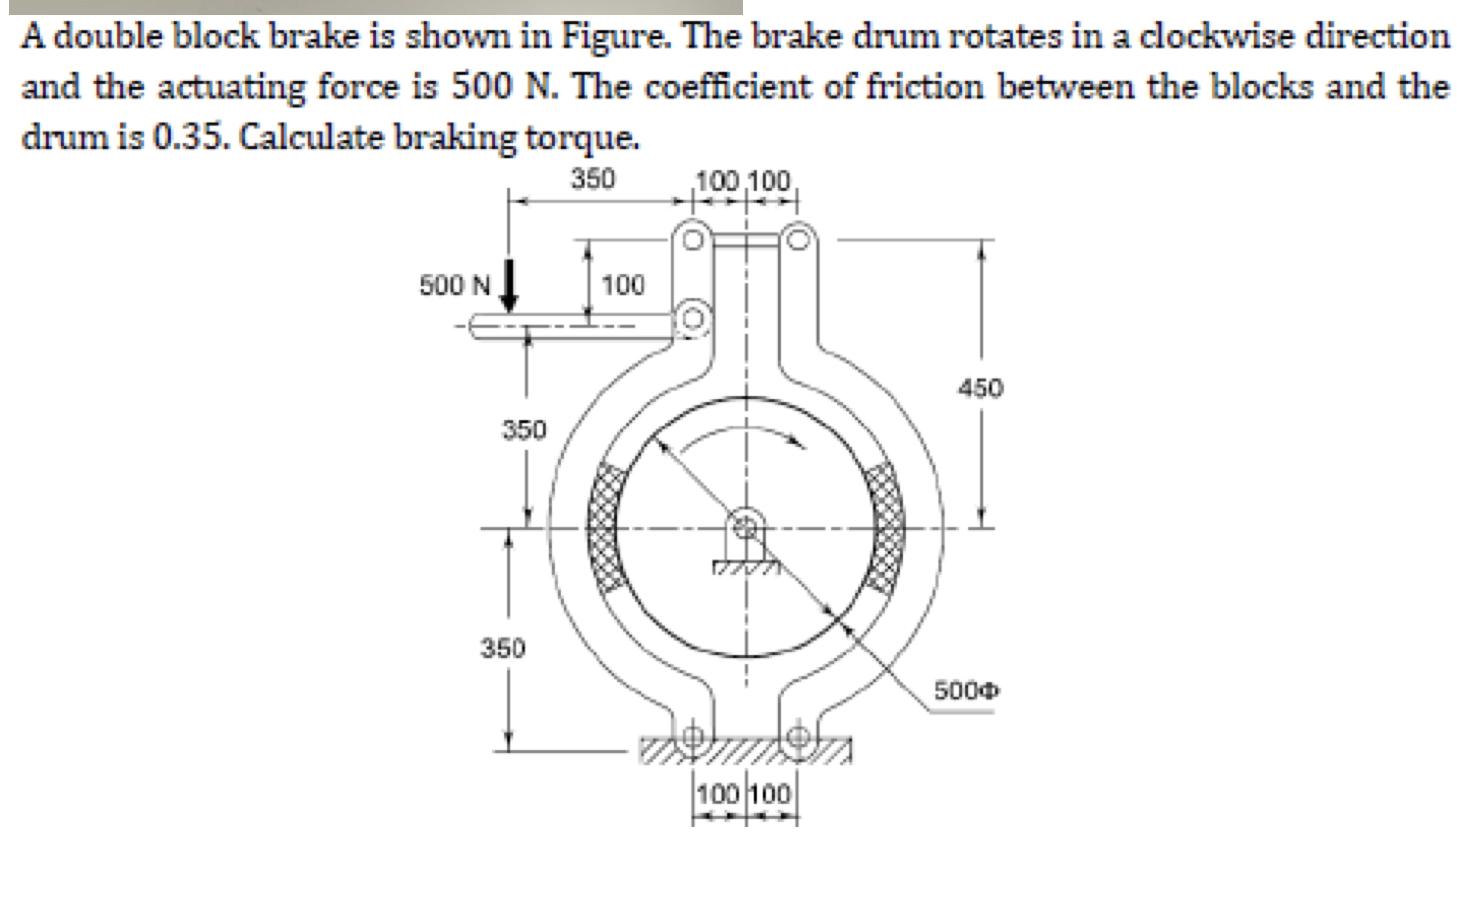 A double block brake is shown in Figure. The brake drum rotates in a clockwise direction and the actuating